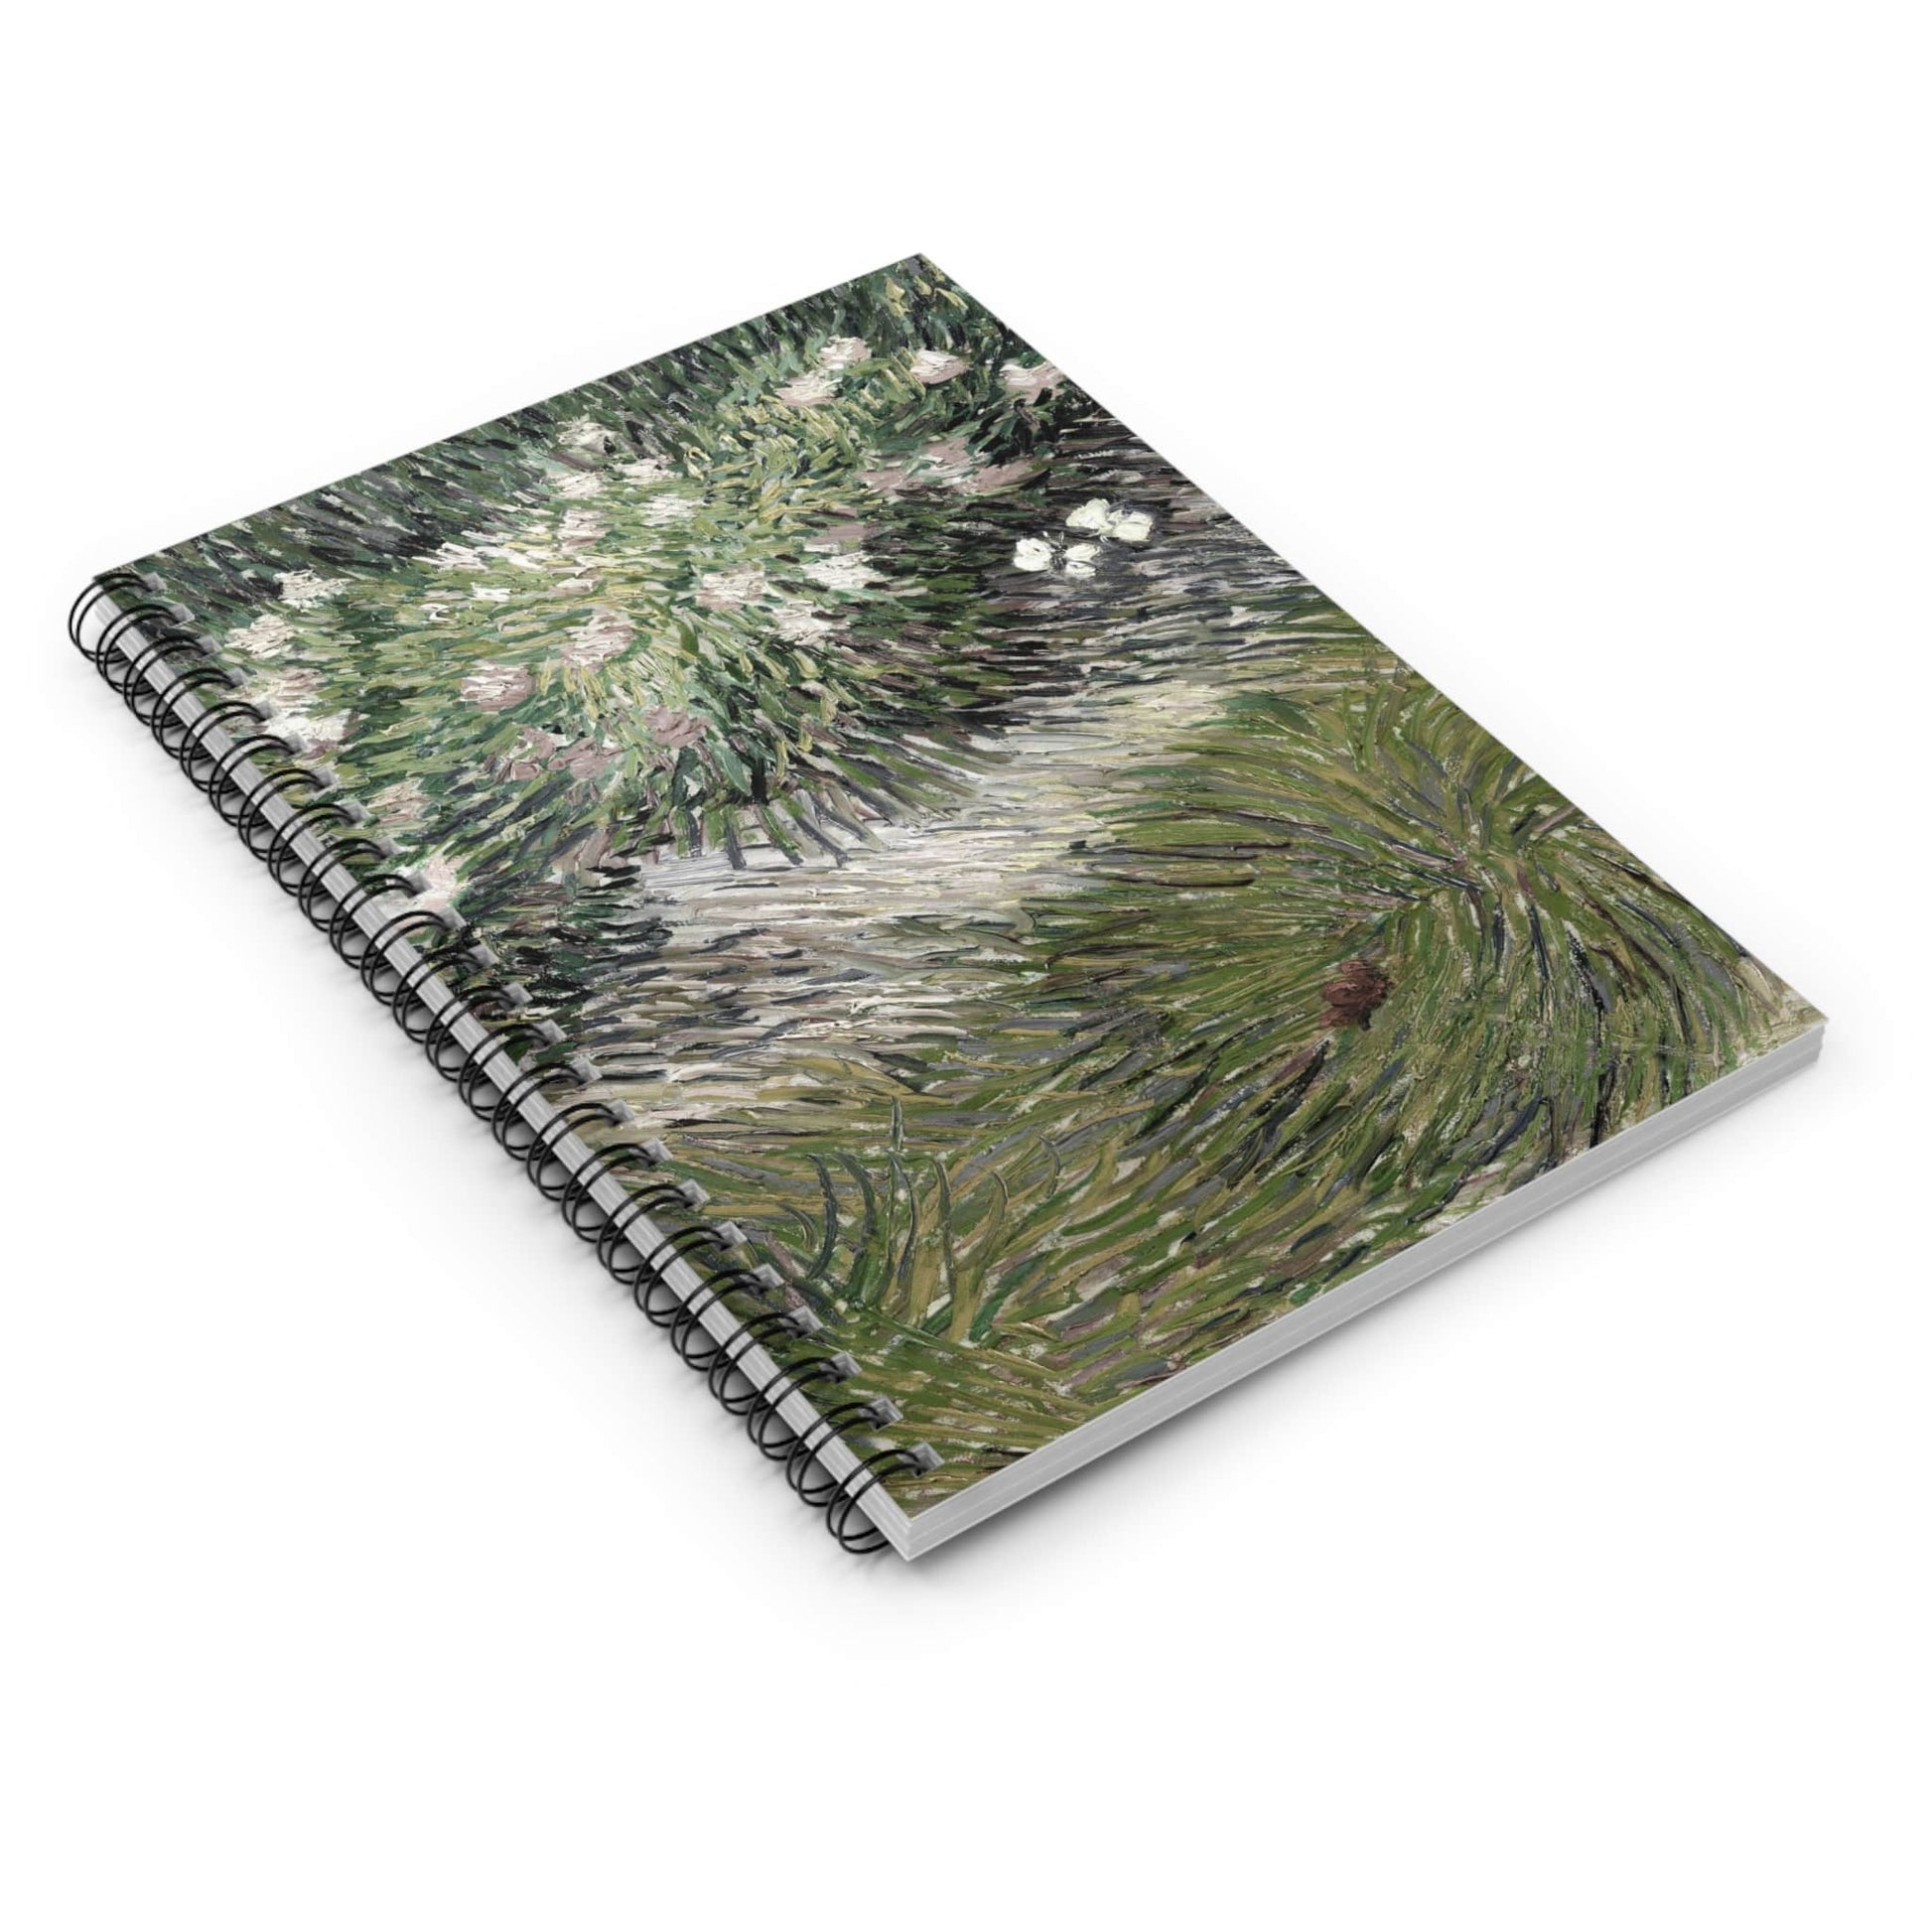 Abstract Garden Spiral Notebook Laying Flat on White Surface